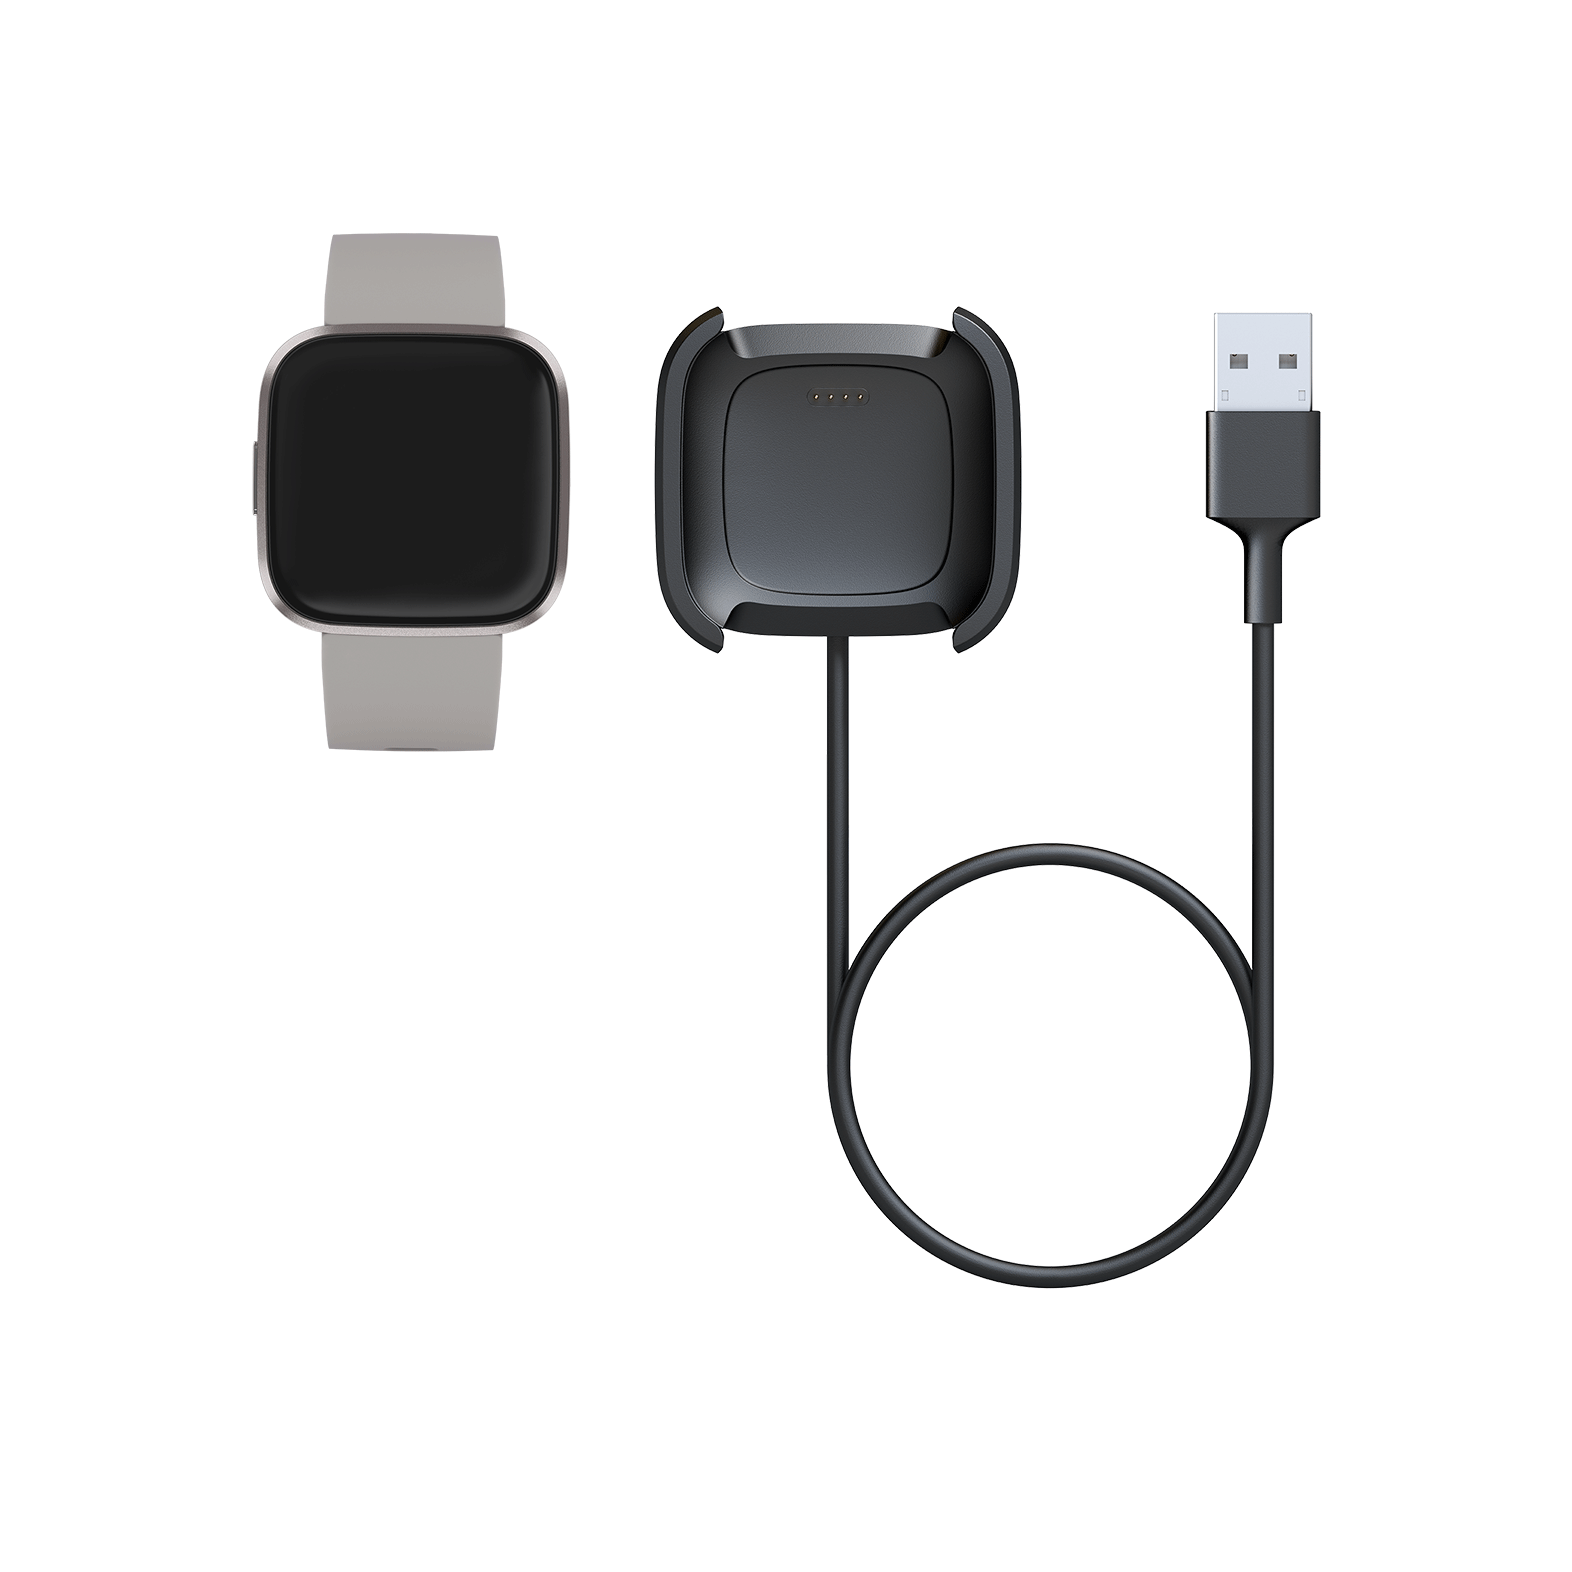 Exclusive Aluminum Alloy Charging Cable Charger Dock for Fitbit Versa 2 Smartwatch Silver KIMILAR compatible with Fitbit Versa 2 Charger